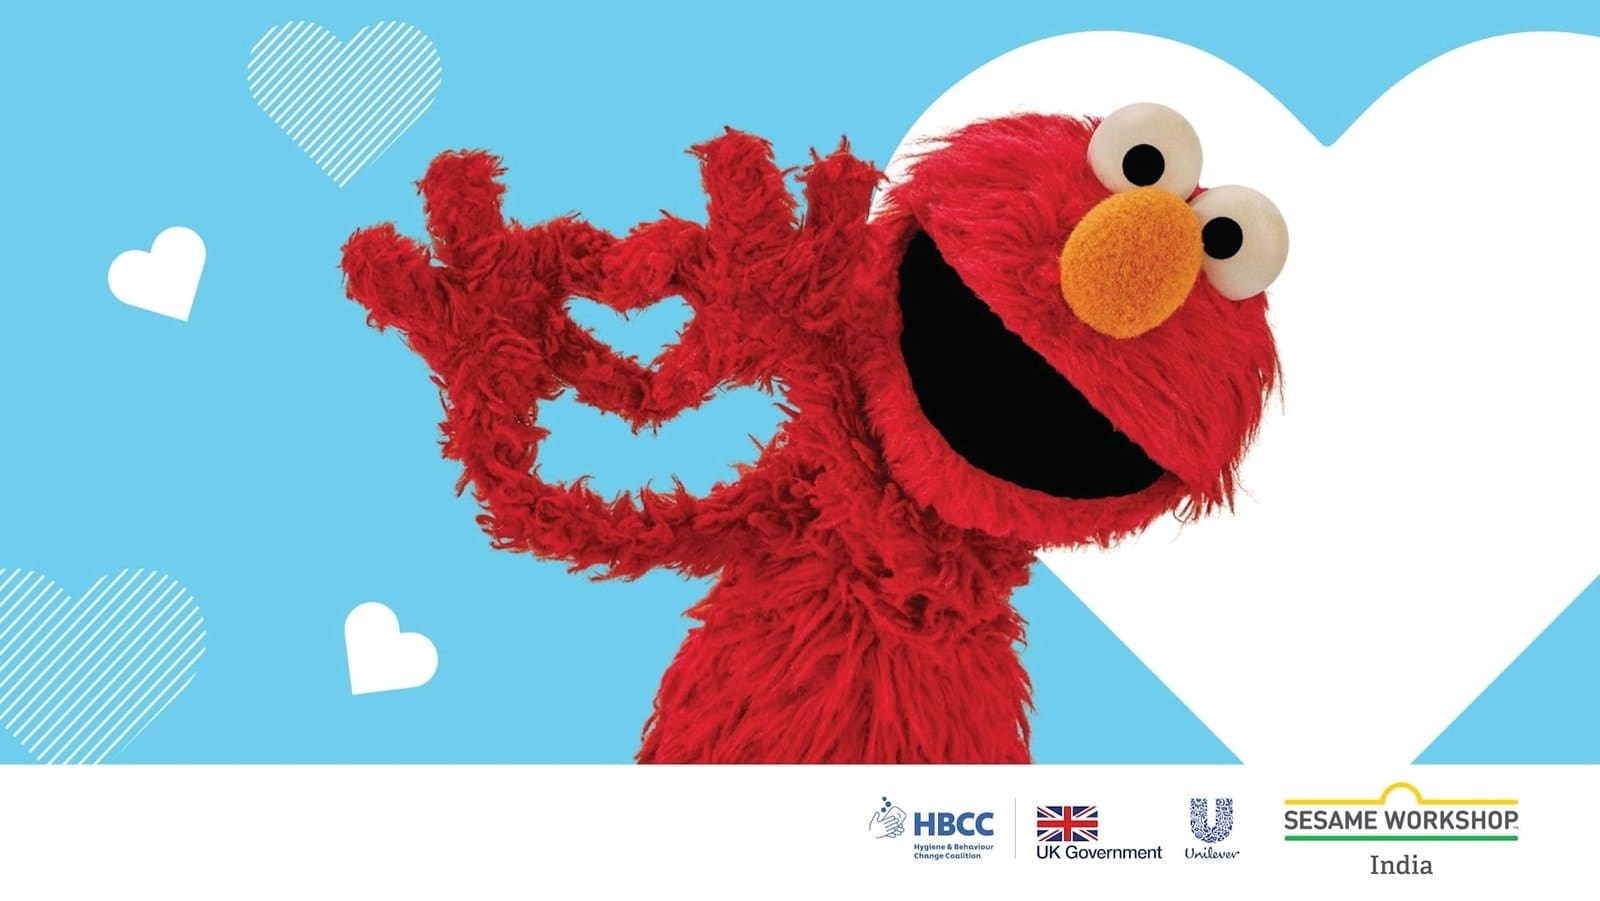 SESAME WORKSHOP INDIA WILL LAUNCH A HAND HYGIENE CAMPAIGN ON GLOBAL HANDWASHING DAY IN COLLABORATION WITH THE HYGIENE AND BEHAVIOUR CHANGE (HBCC)